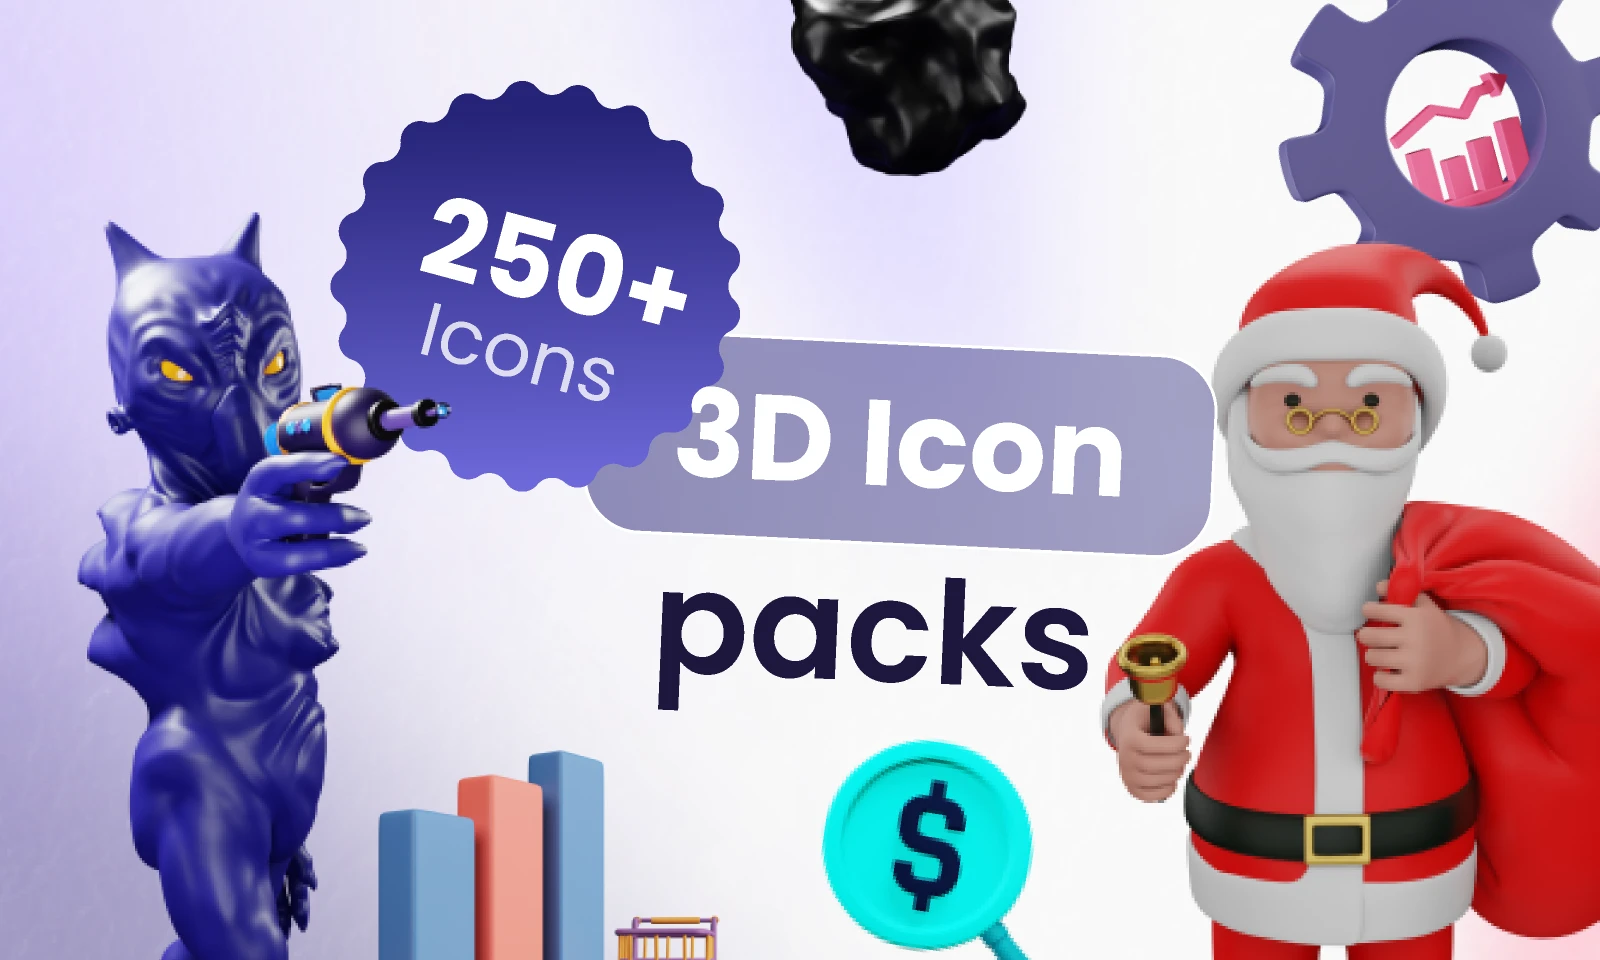 250+ 3D icon packs for Figma and Adobe XD